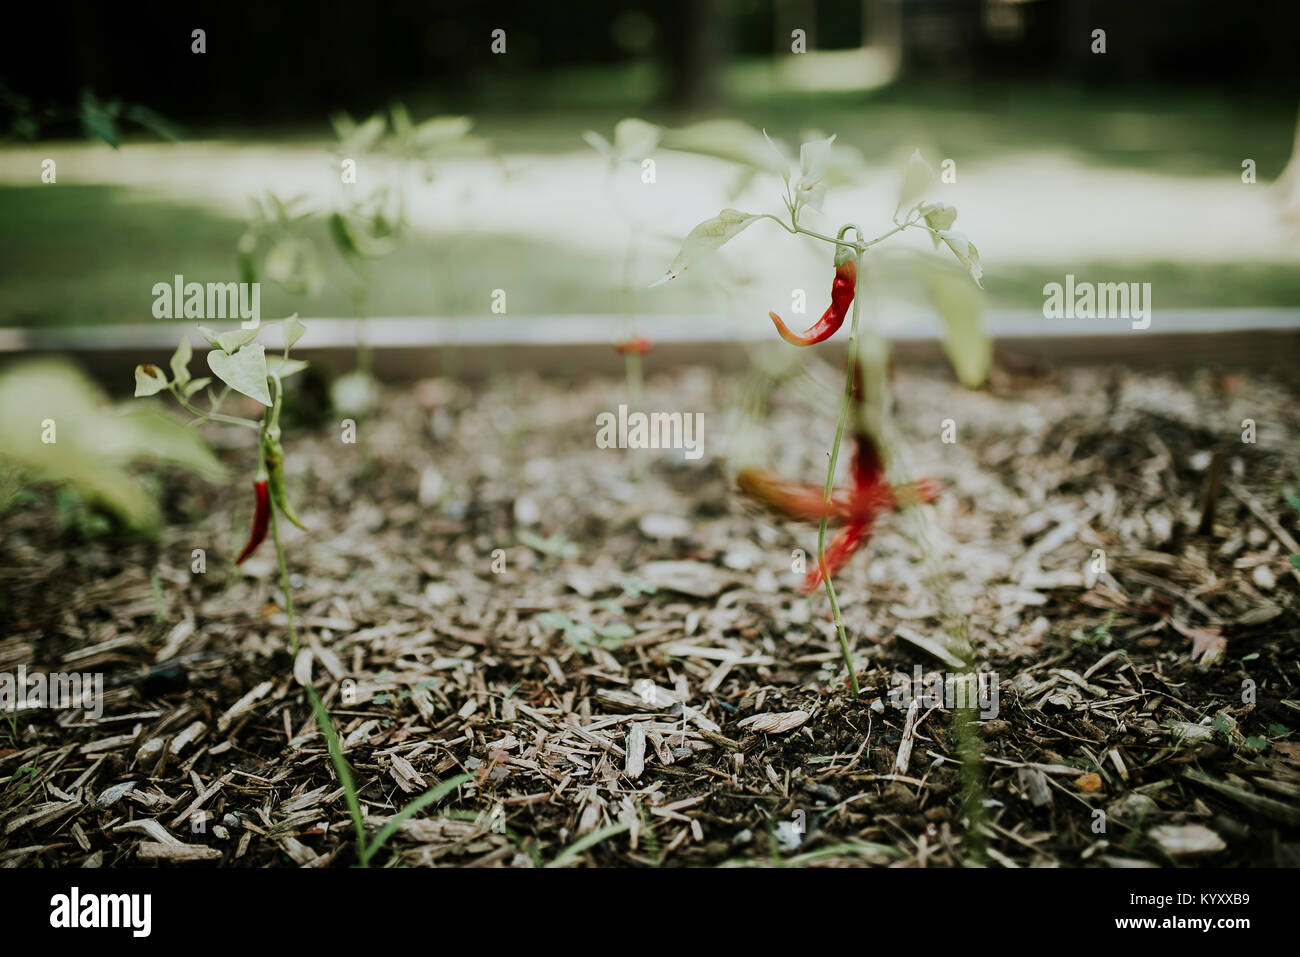 Red chili peppers growing on plants at vegetable garden Stock Photo